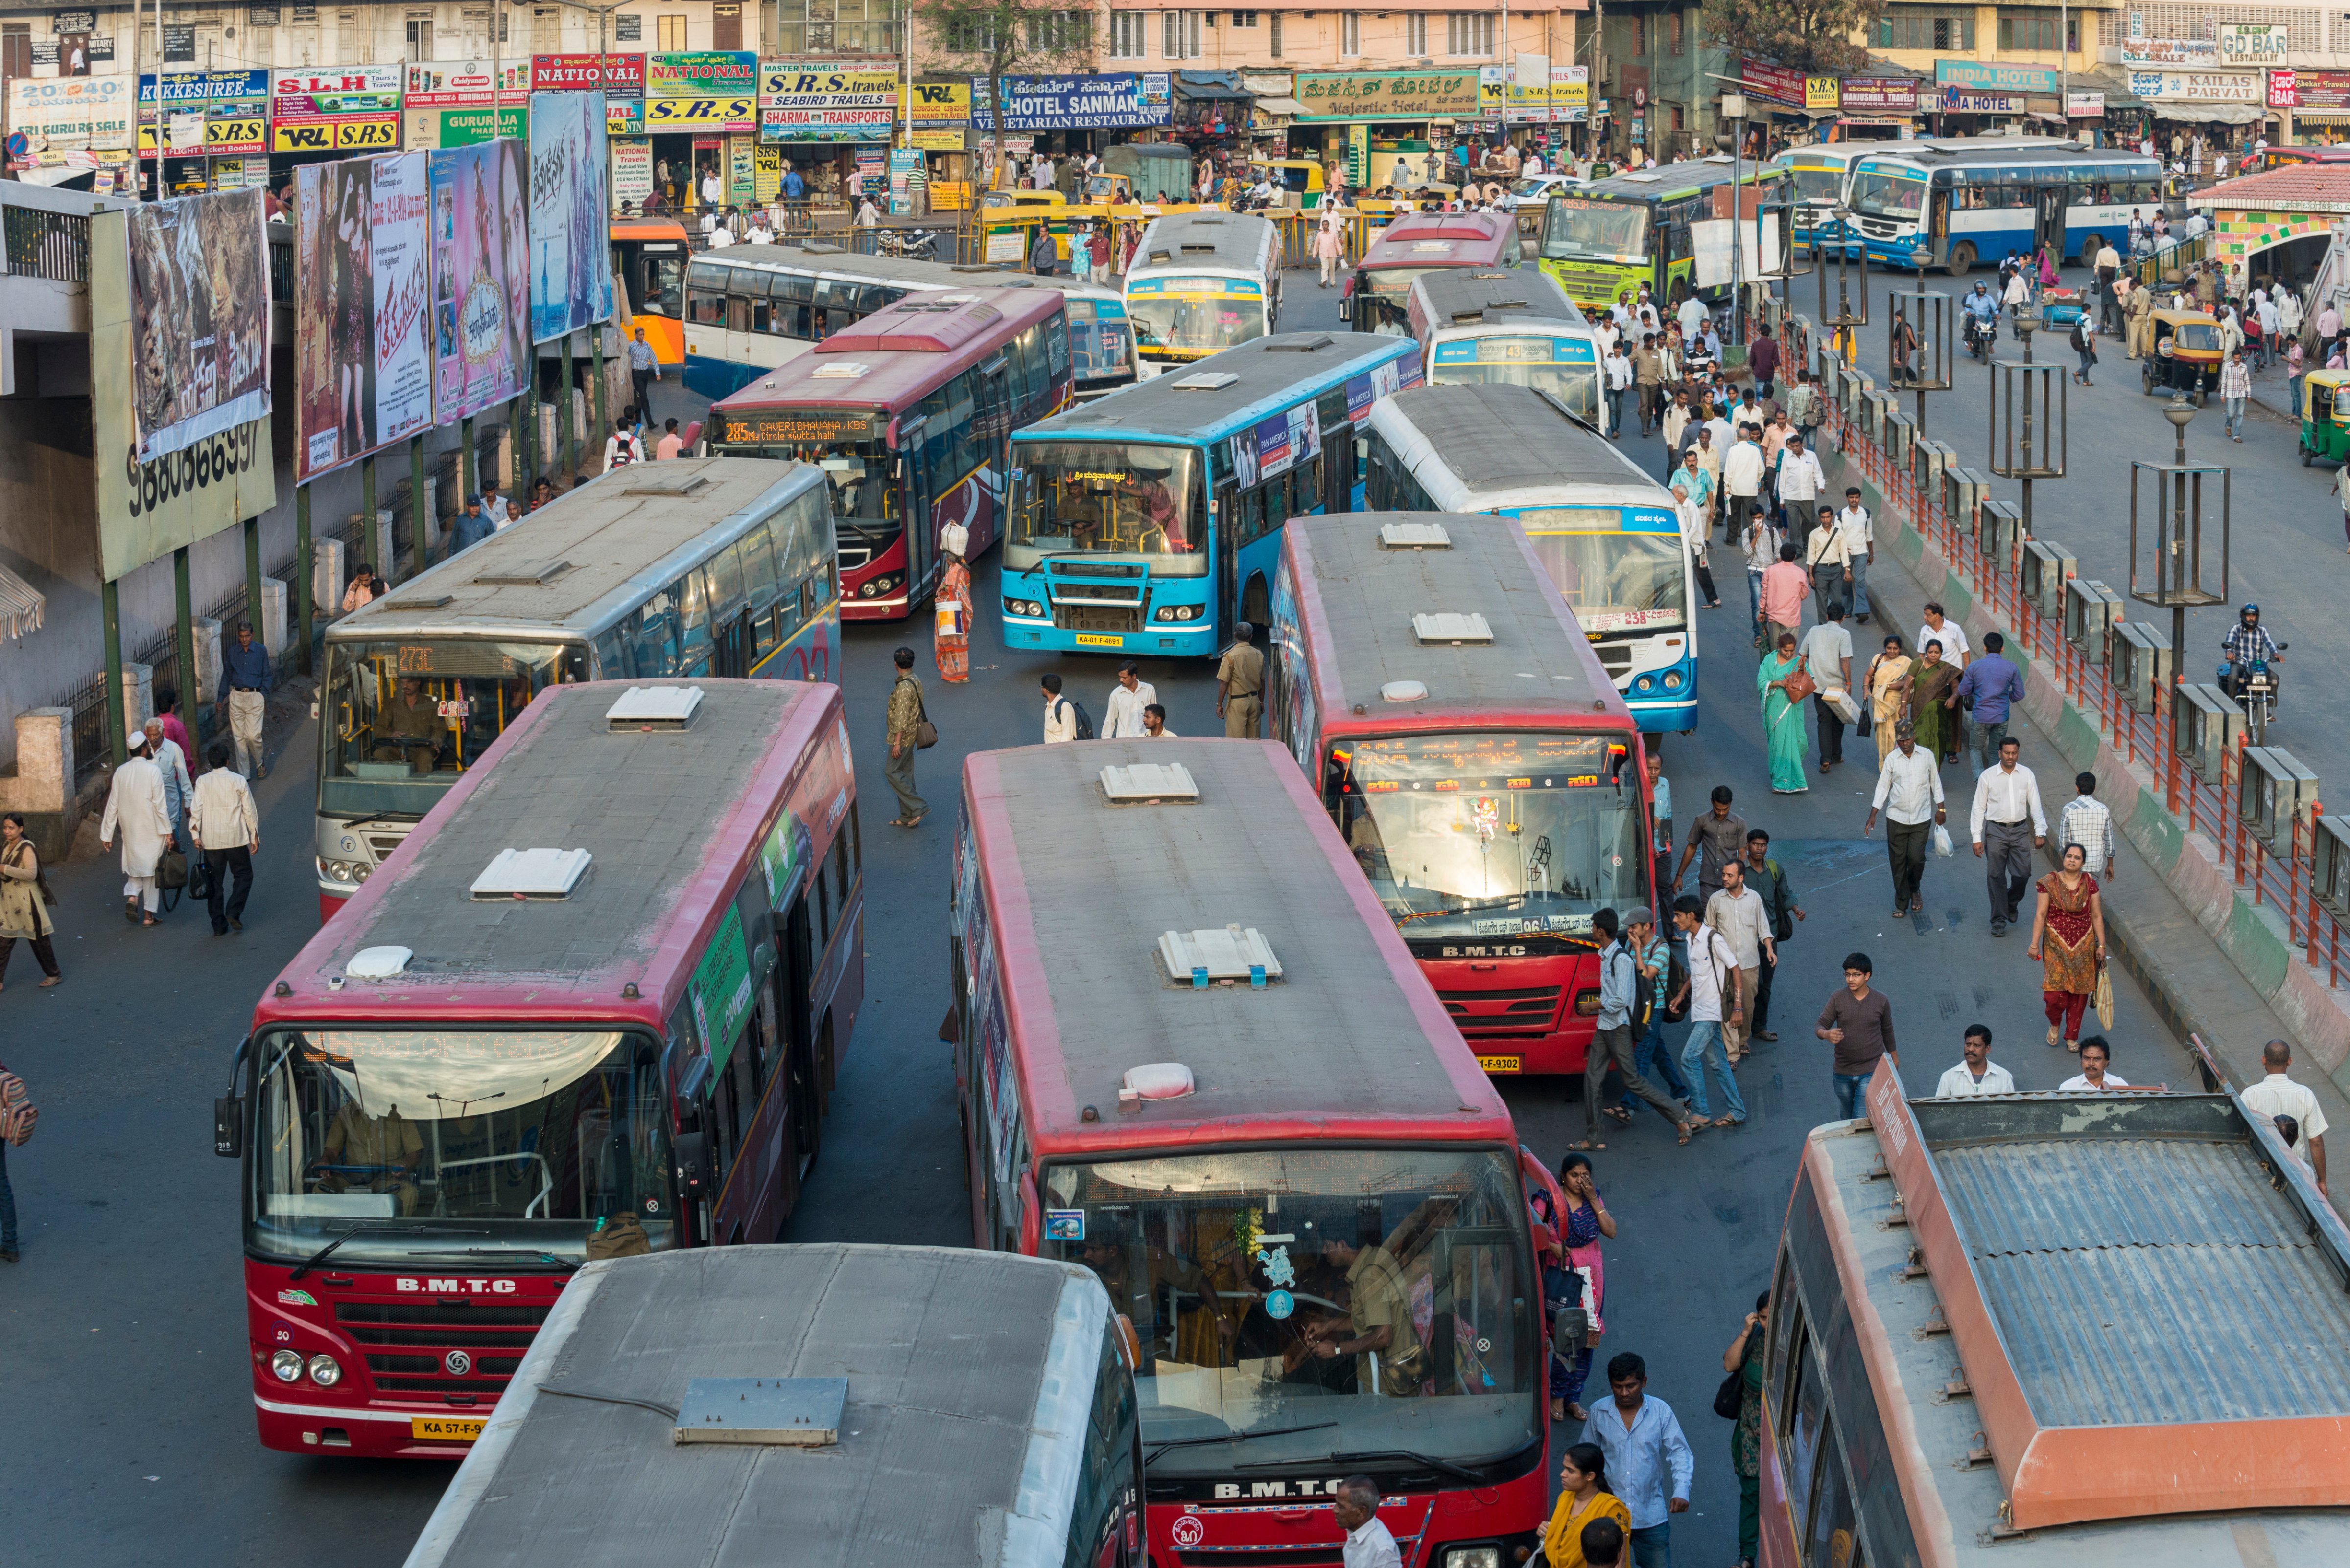 Chaotic bus traffic at Kempegowda Bus Station, more commonly known as Majestic Bus Station, in Bangalore, India, on March 11, 2014 (Frank Bienewald—LightRocket/Getty Images)